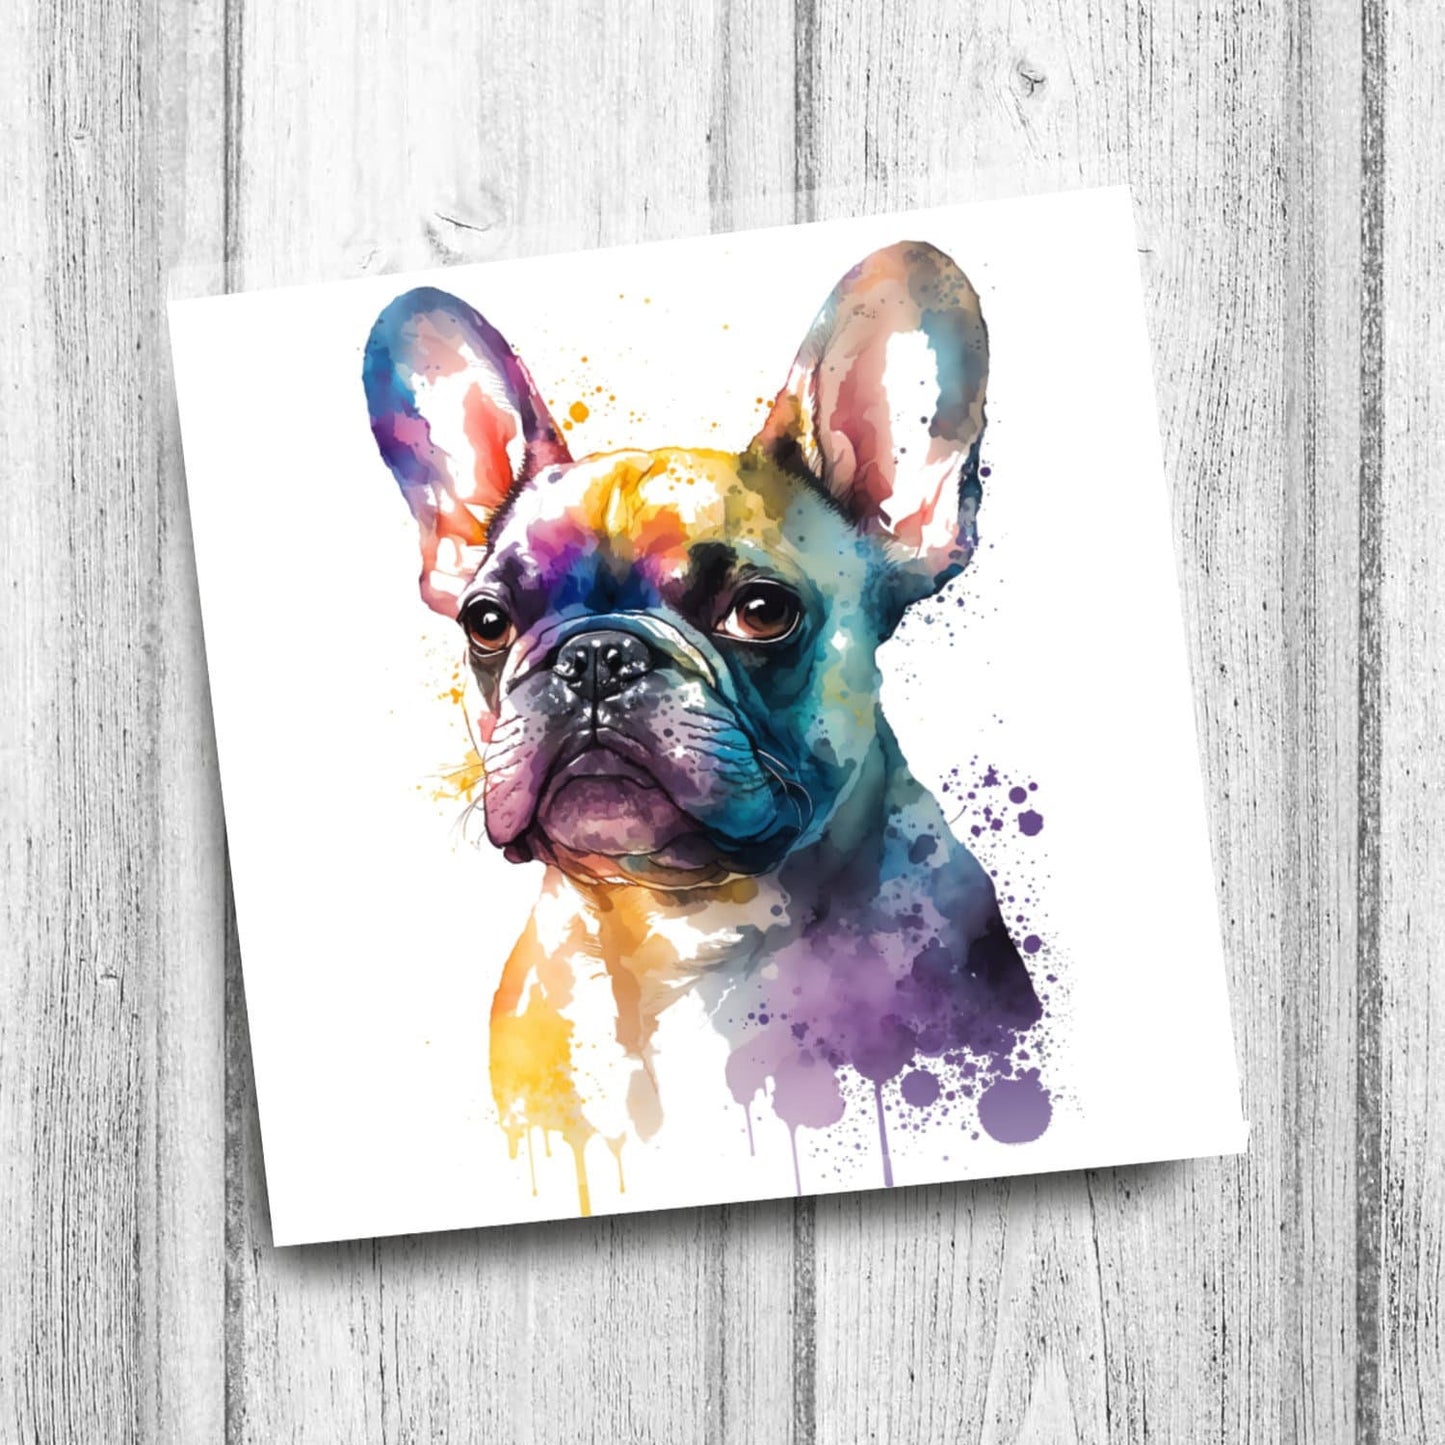 French Bull Dog Glass Coaster, Colorful Coasters for Drinks